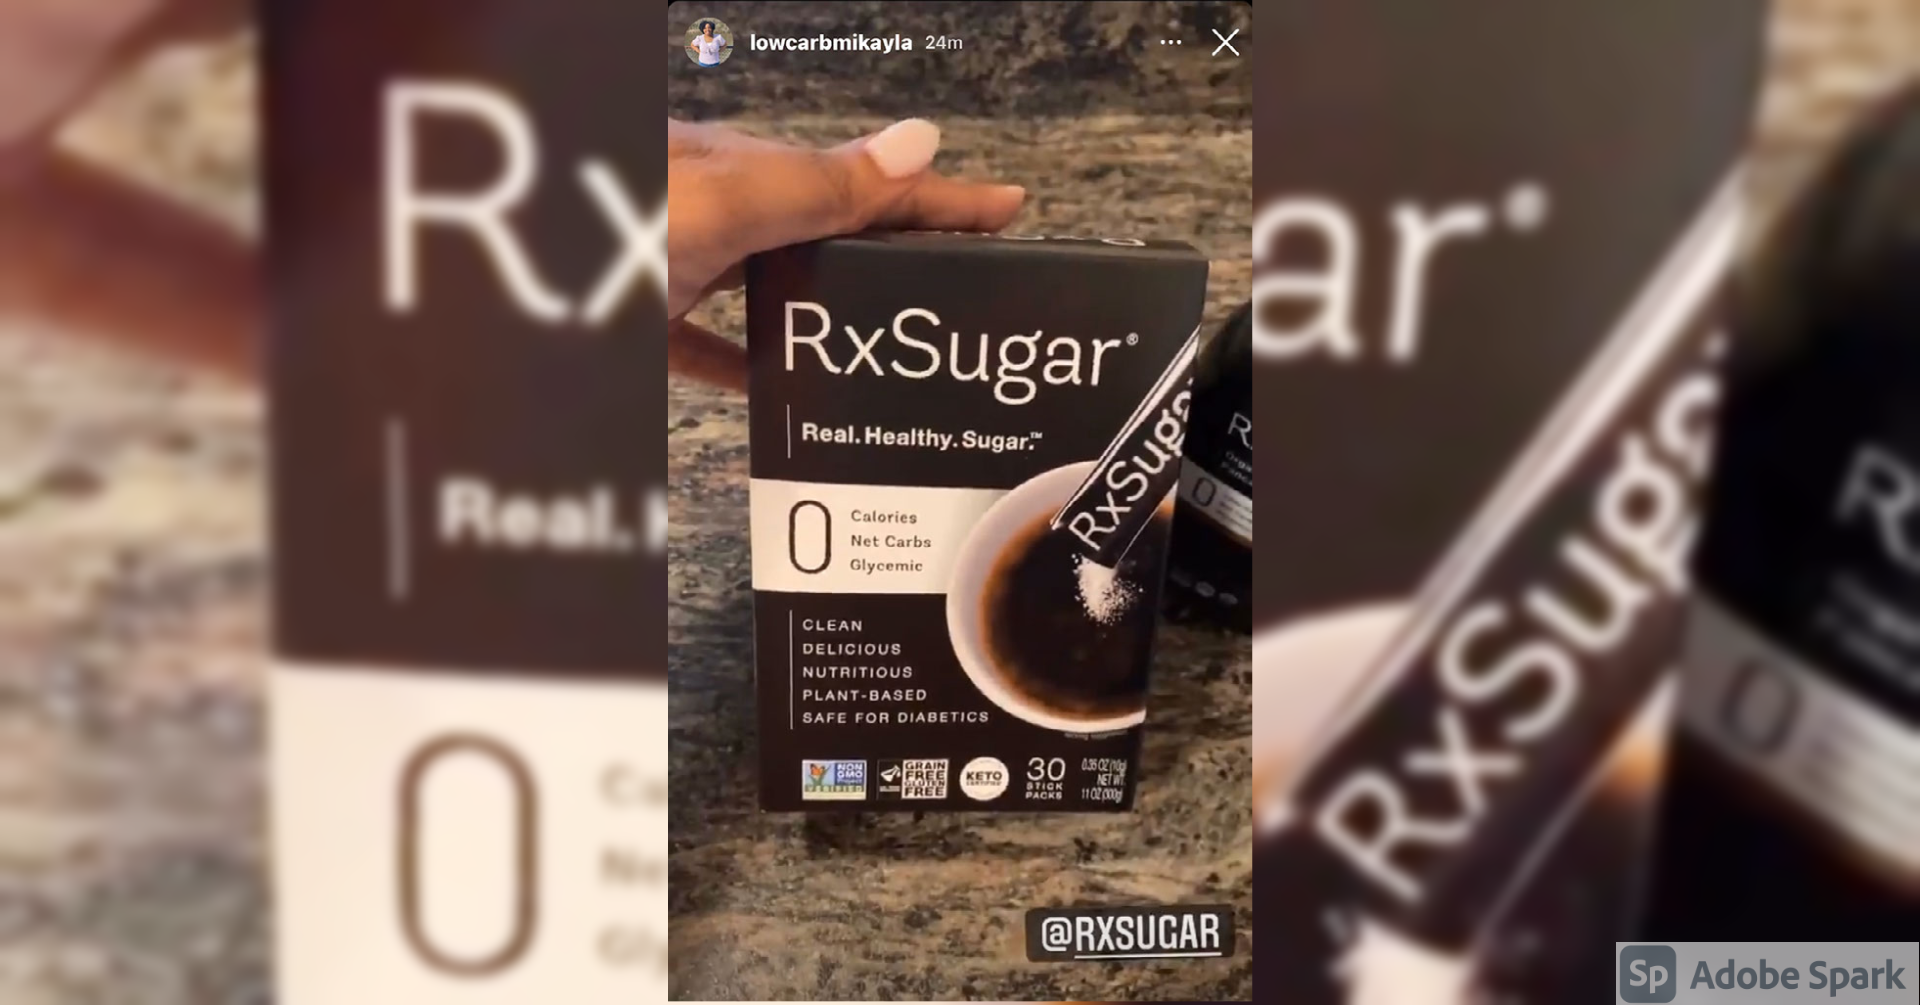 Low Carb Mikayla Reviewing Her RxSugar Sugar Stick Pack